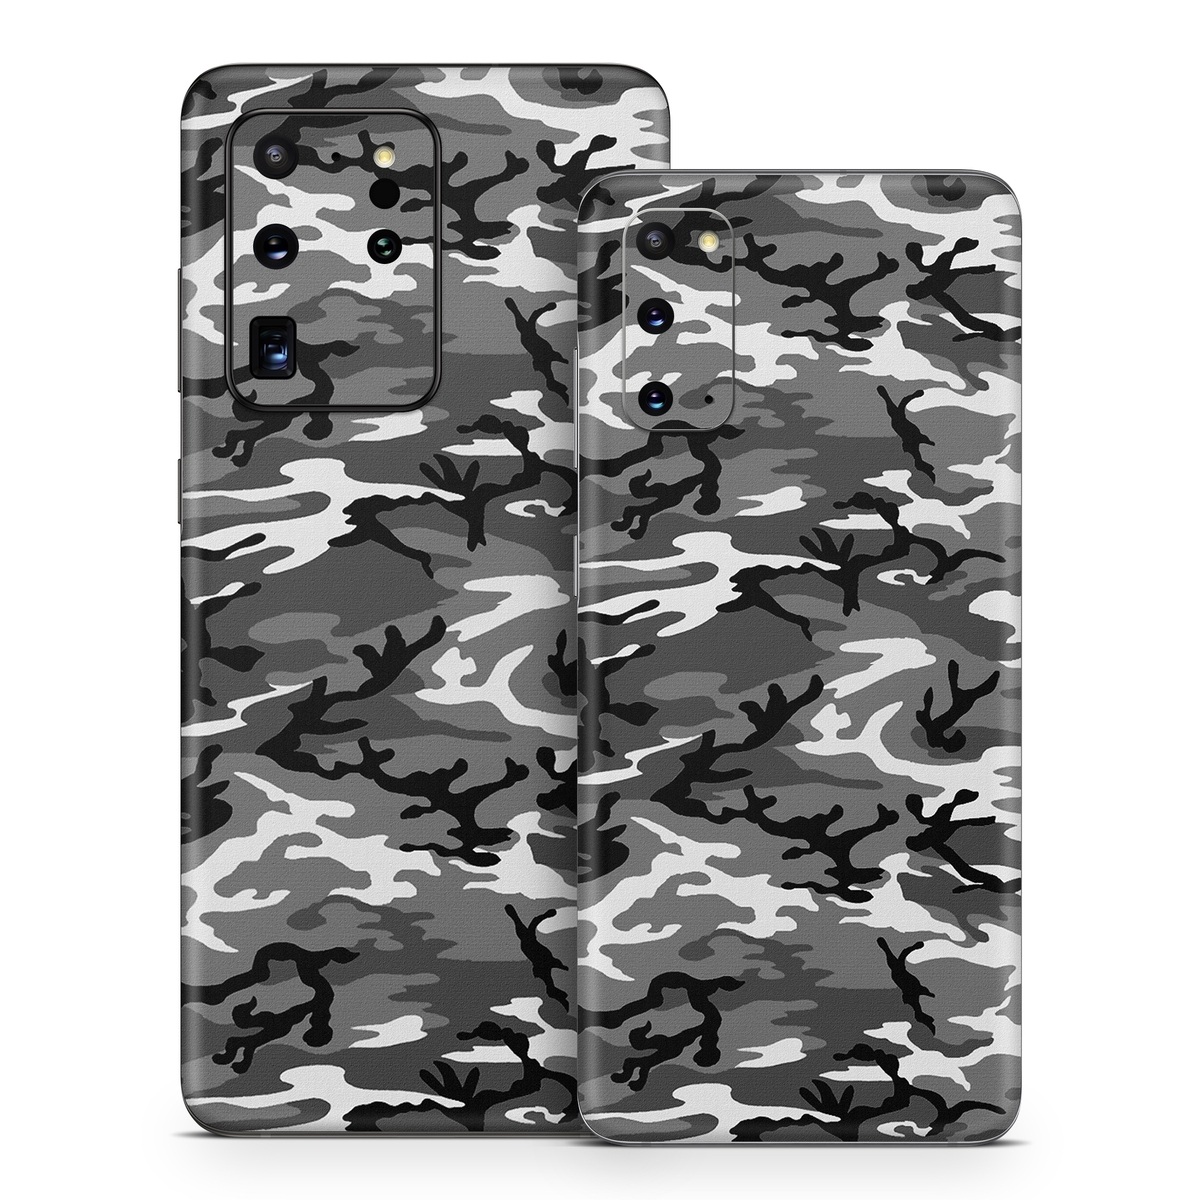 Samsung Galaxy S20 Series Skin design of Military camouflage, Pattern, Clothing, Camouflage, Uniform, Design, Textile, with black, gray colors